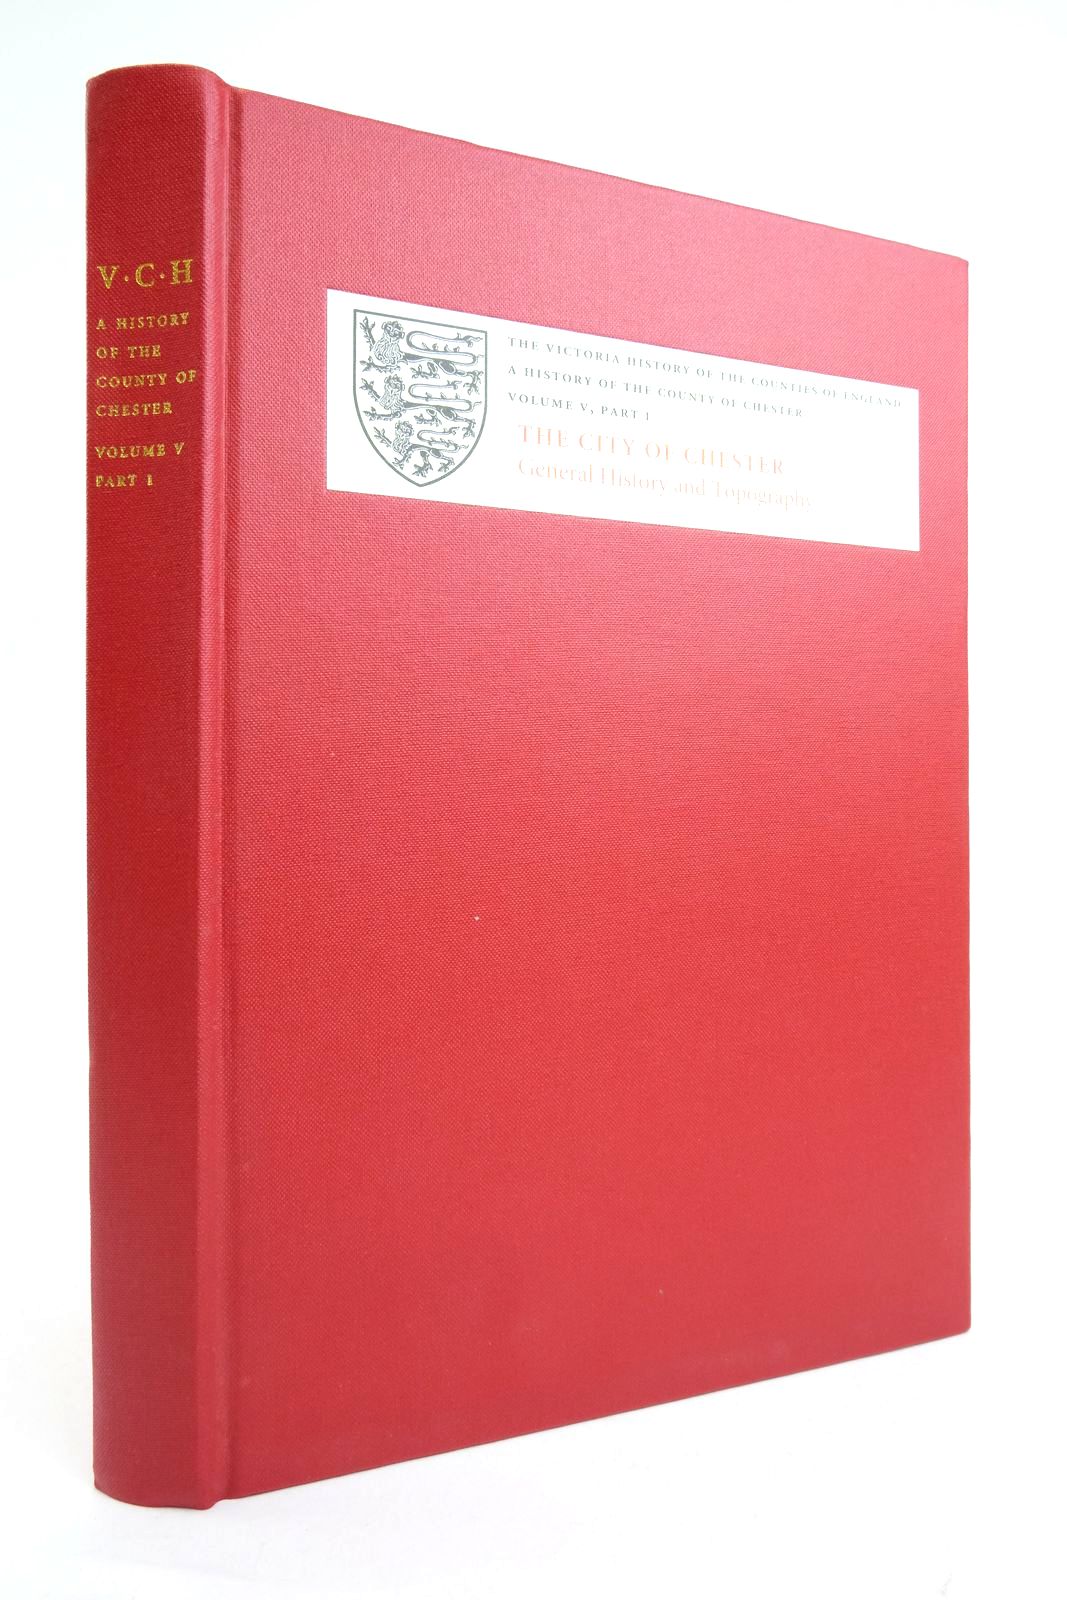 Photo of A HISTORY OF THE COUNTY OF CHESTER: VOLUME V, PART 1 THE CITY OF CHESTER: GENERAL HISTORY AND TOPOGRAPHY- Stock Number: 2136482